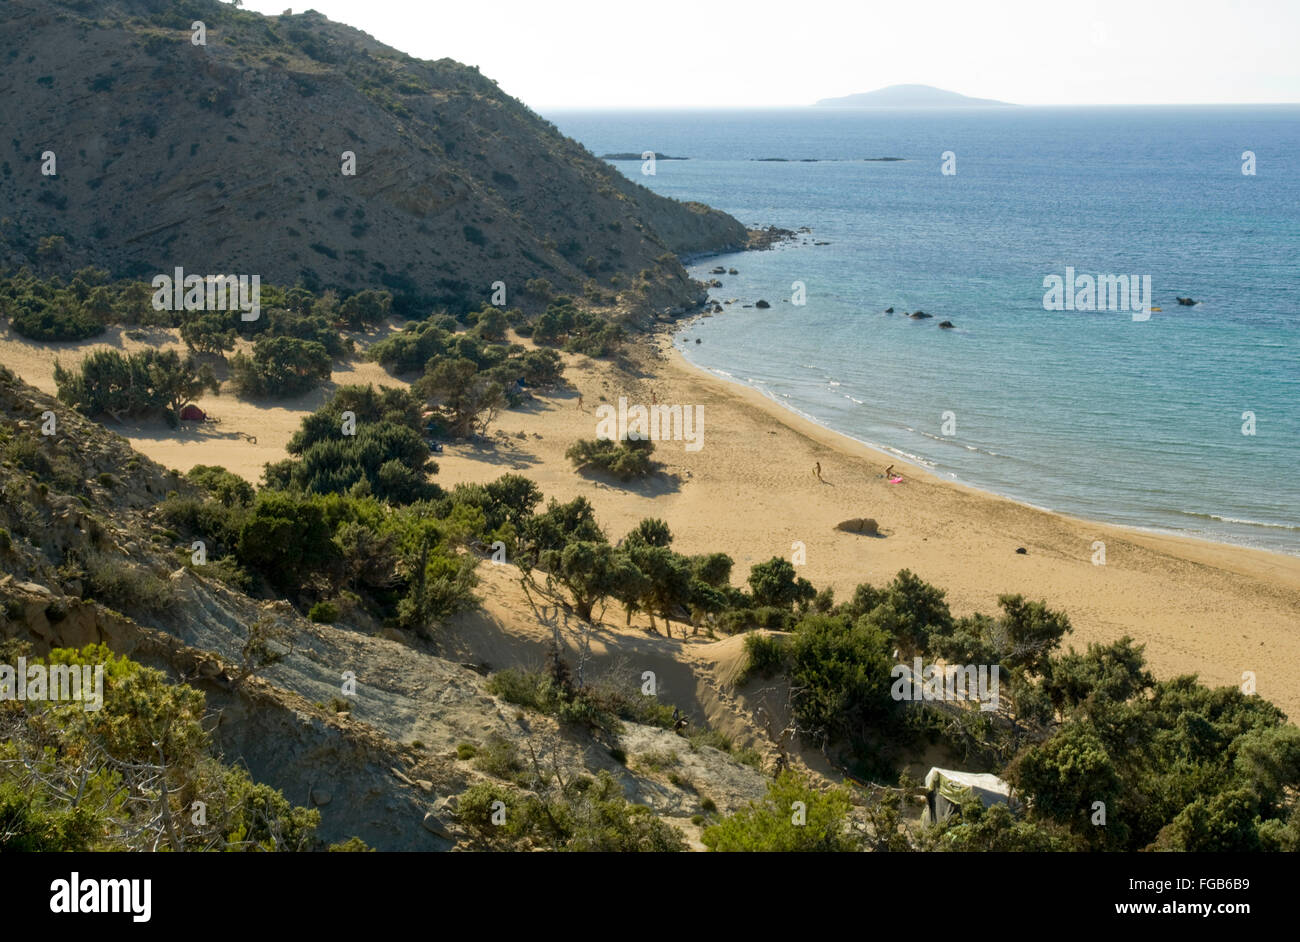 Page 2 - Gavdos Island High Resolution Stock Photography and Images - Alamy